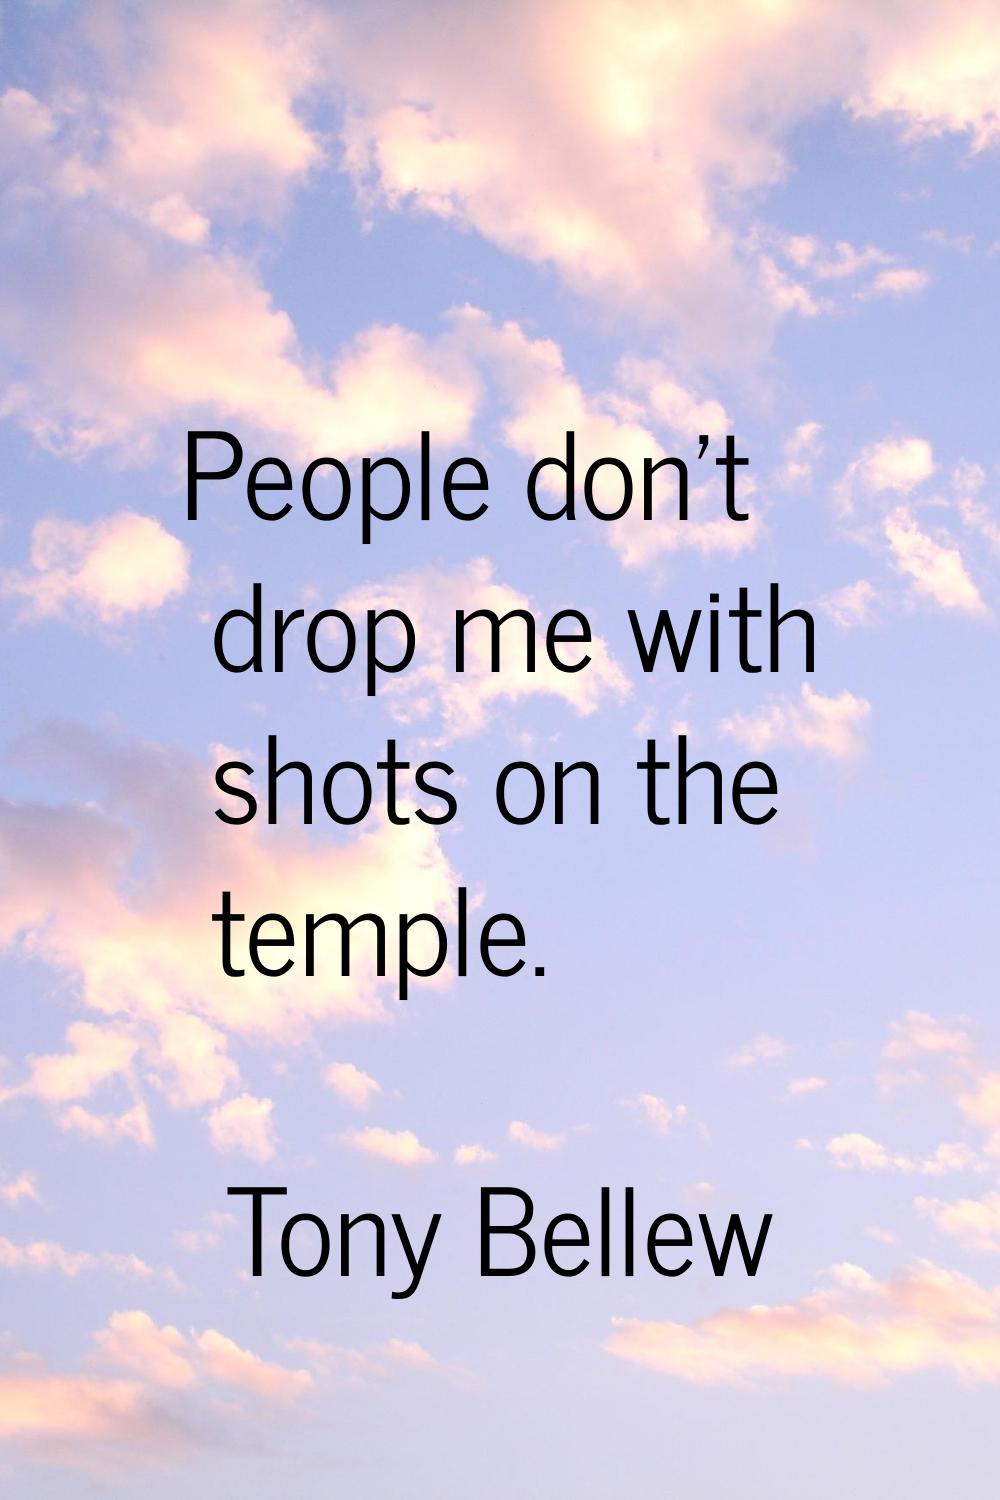 People don't drop me with shots on the temple.